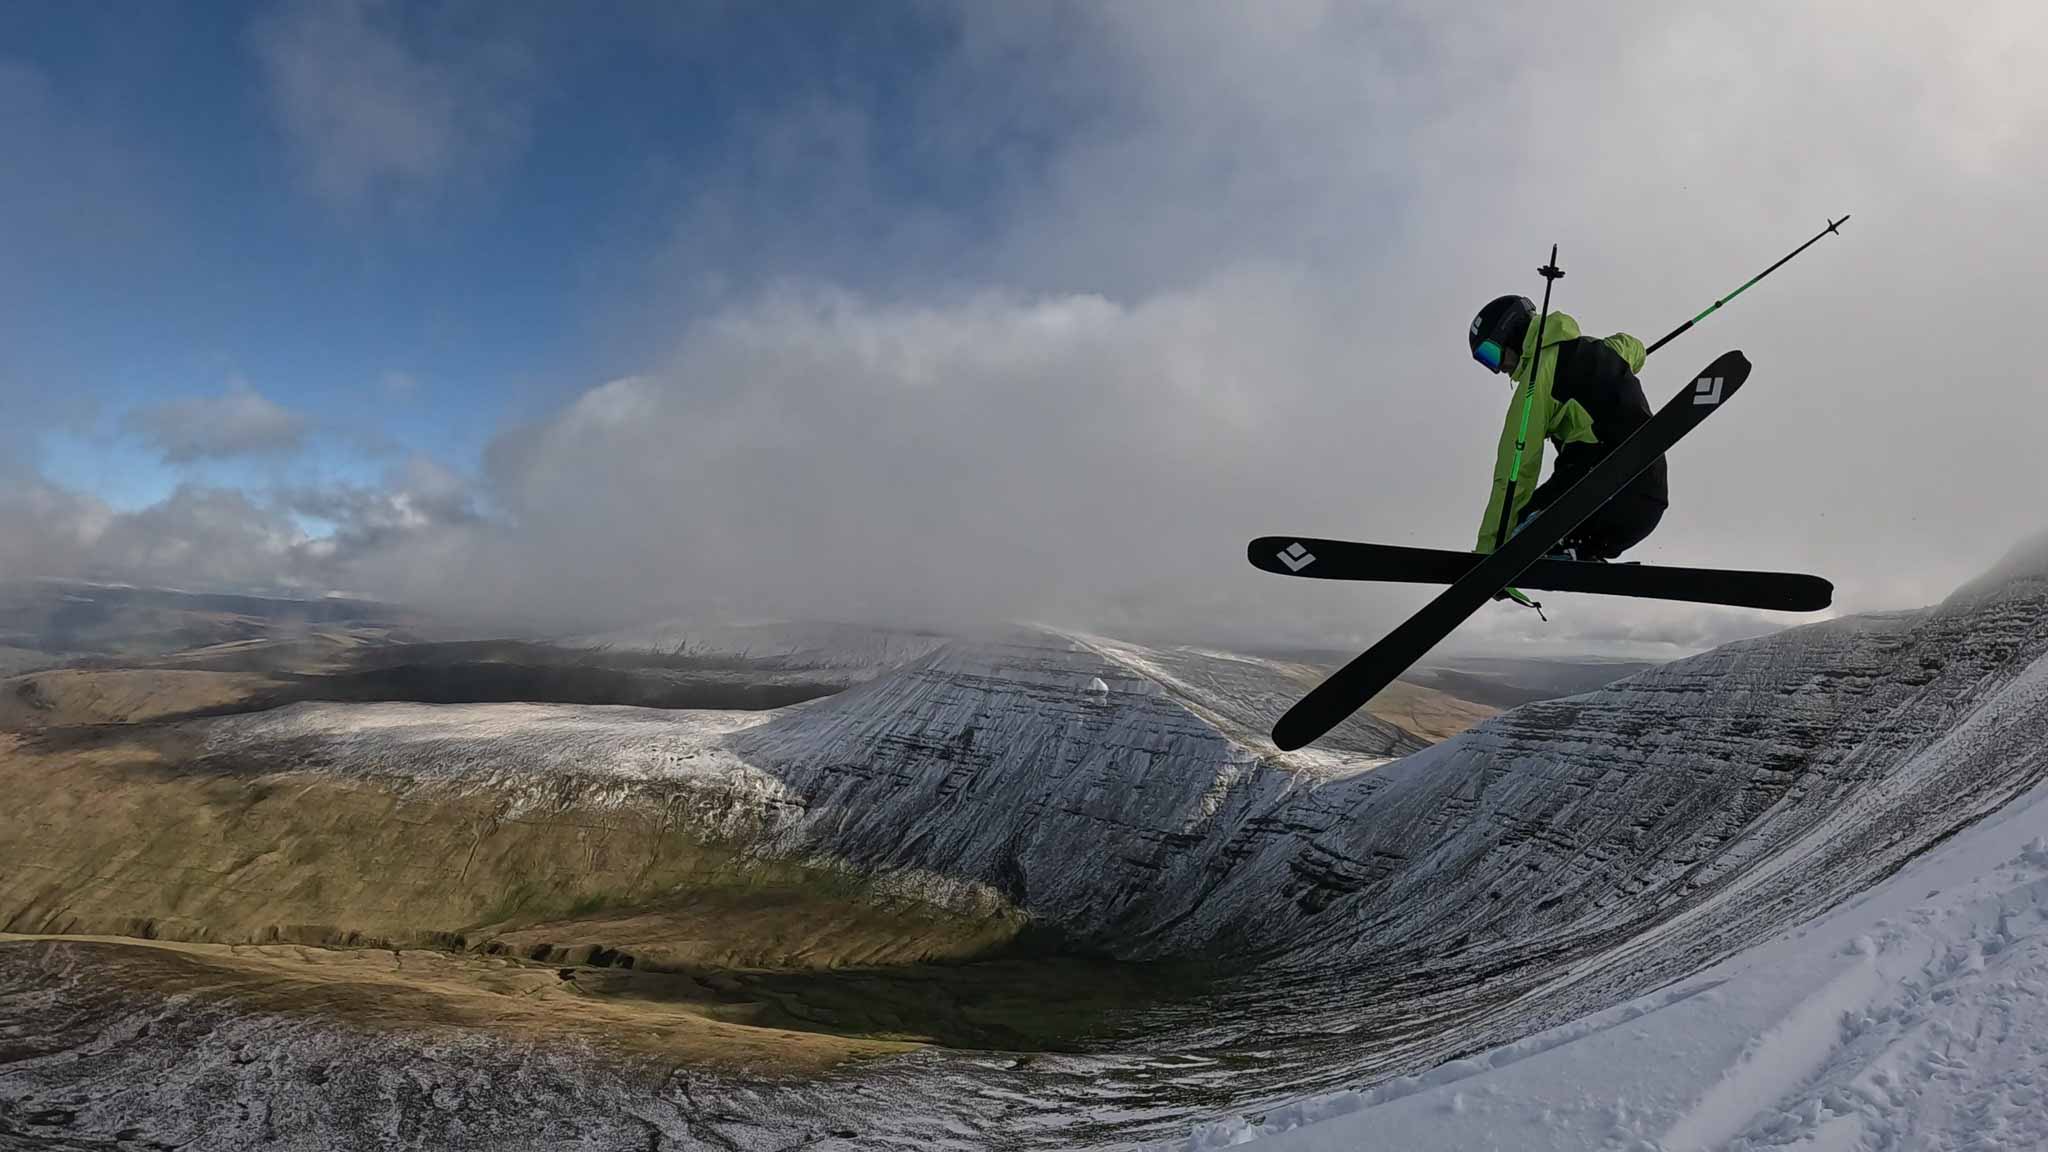 skier grabs skis in air, over barely covered snowy slopes in what can only be Wales